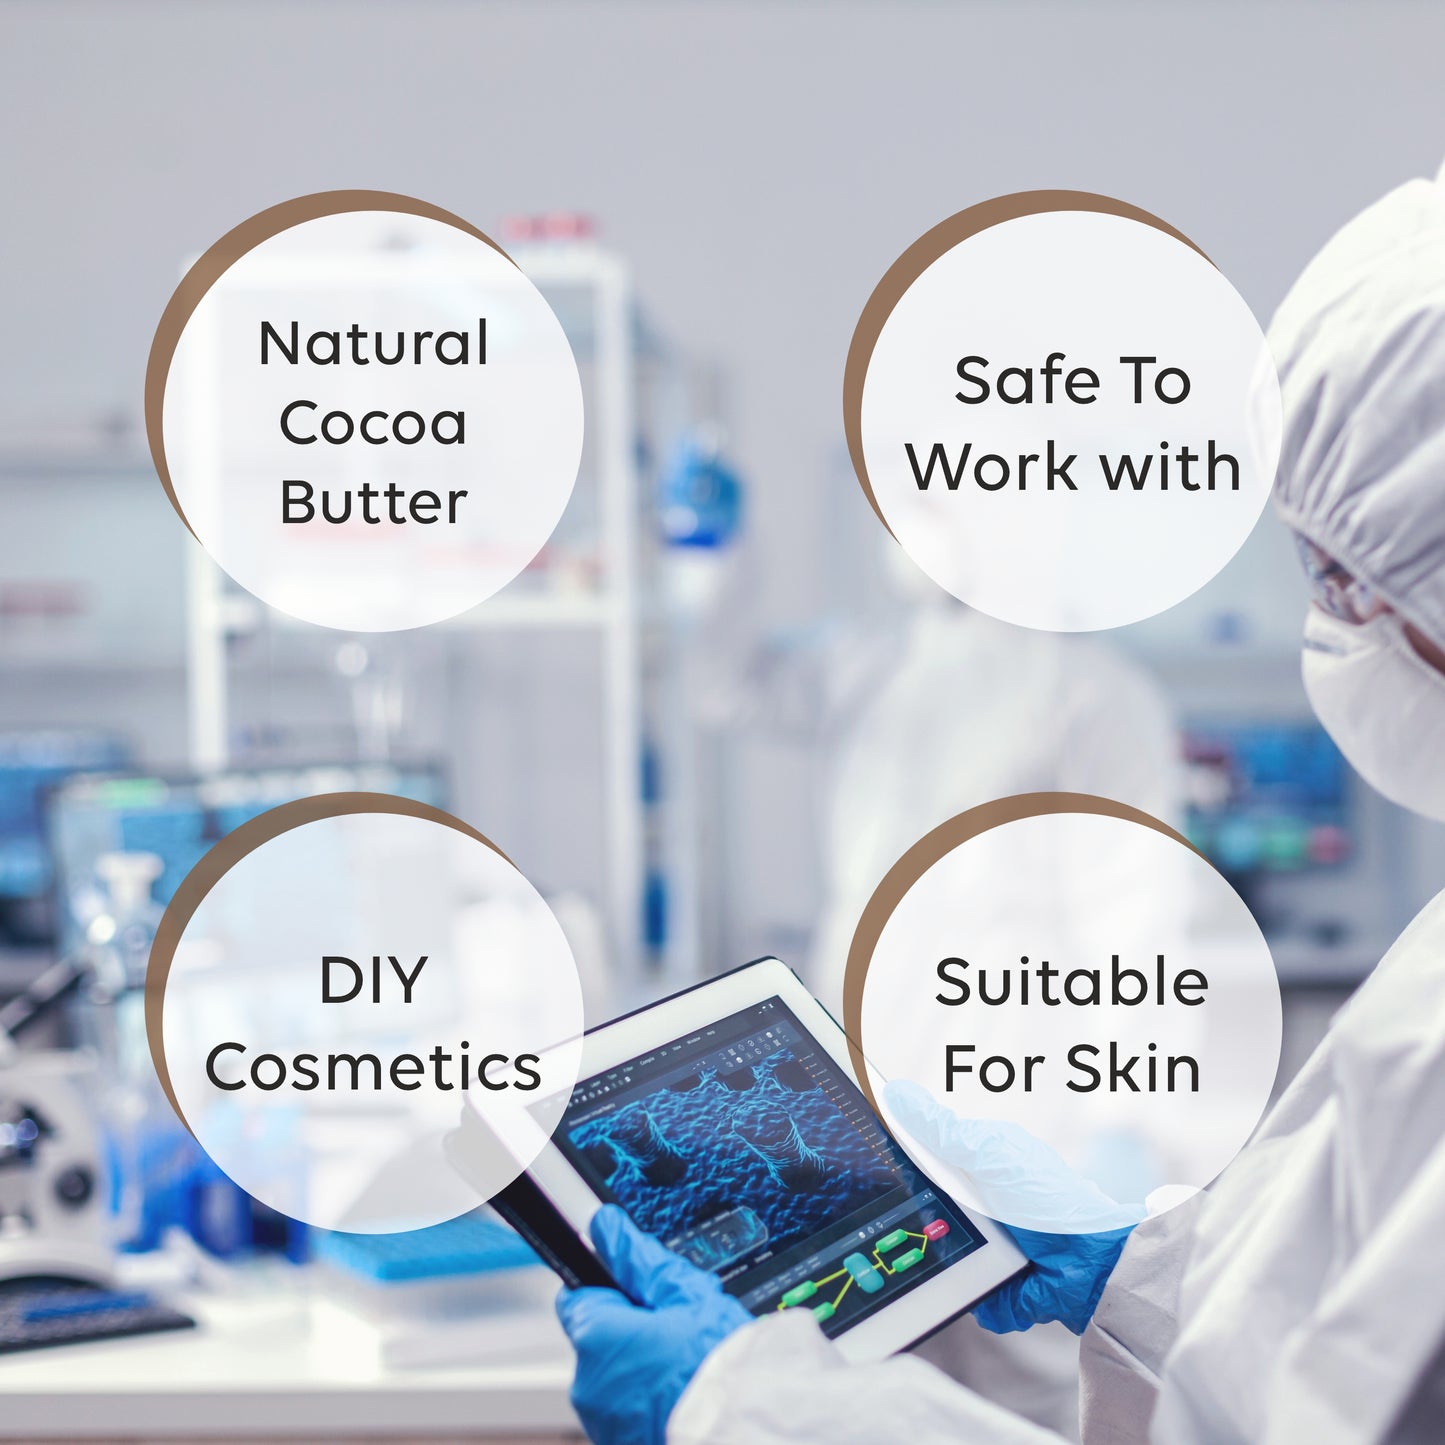 cosmeticmaking, saopmaking, cosmeticmakingingredients, soapmakingingredients,cosmeticingredients,naturalingredients,organicingredients,veganingredients, essentialoils,fragranceoils,carrieroils, carrieroils, butters, clays,botanicals,herbs,preservatives,emulsifiers,surfa ctants,thickeners, thickeners,exfoliants, butter, body butter, kokum butter